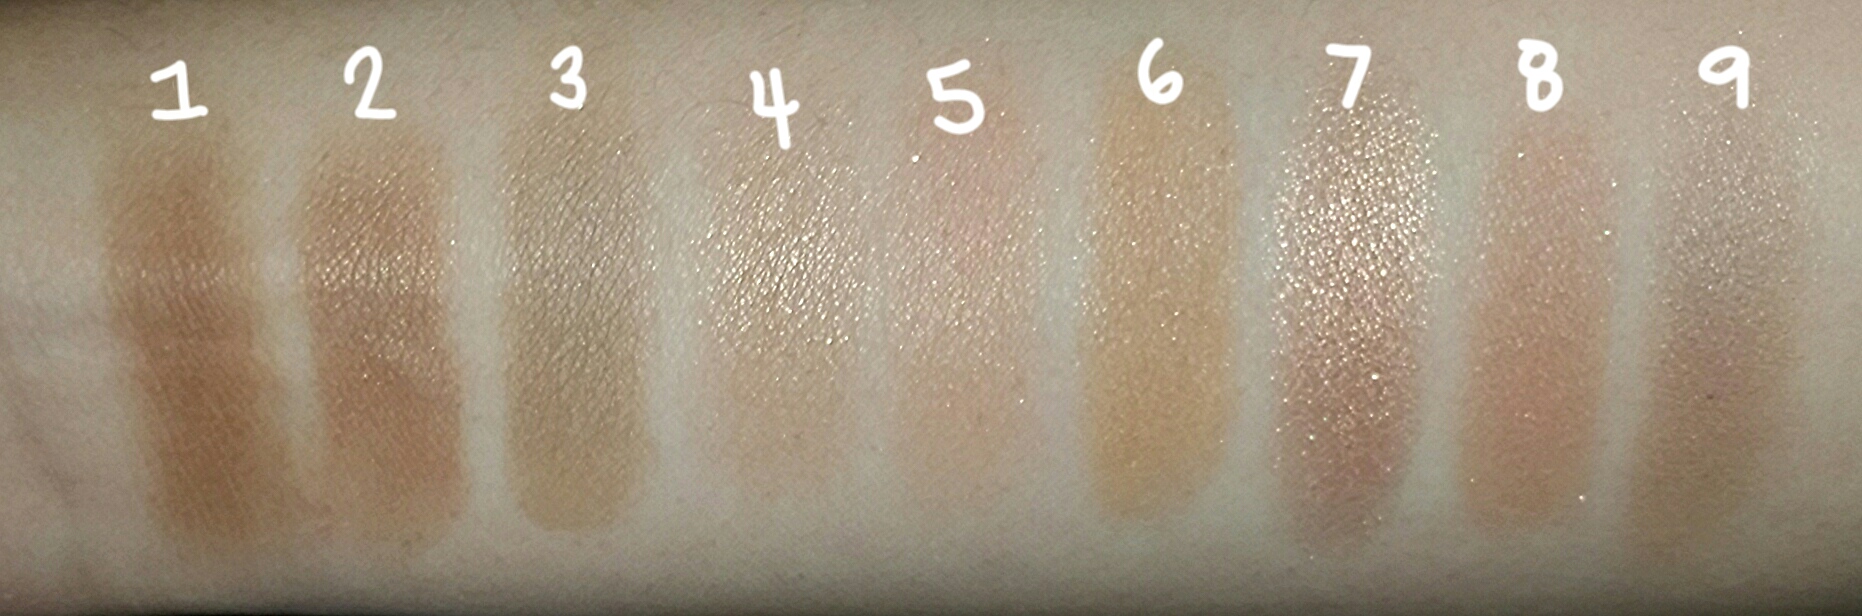 Re: Bronzer Swatches - Beauty Insider Community